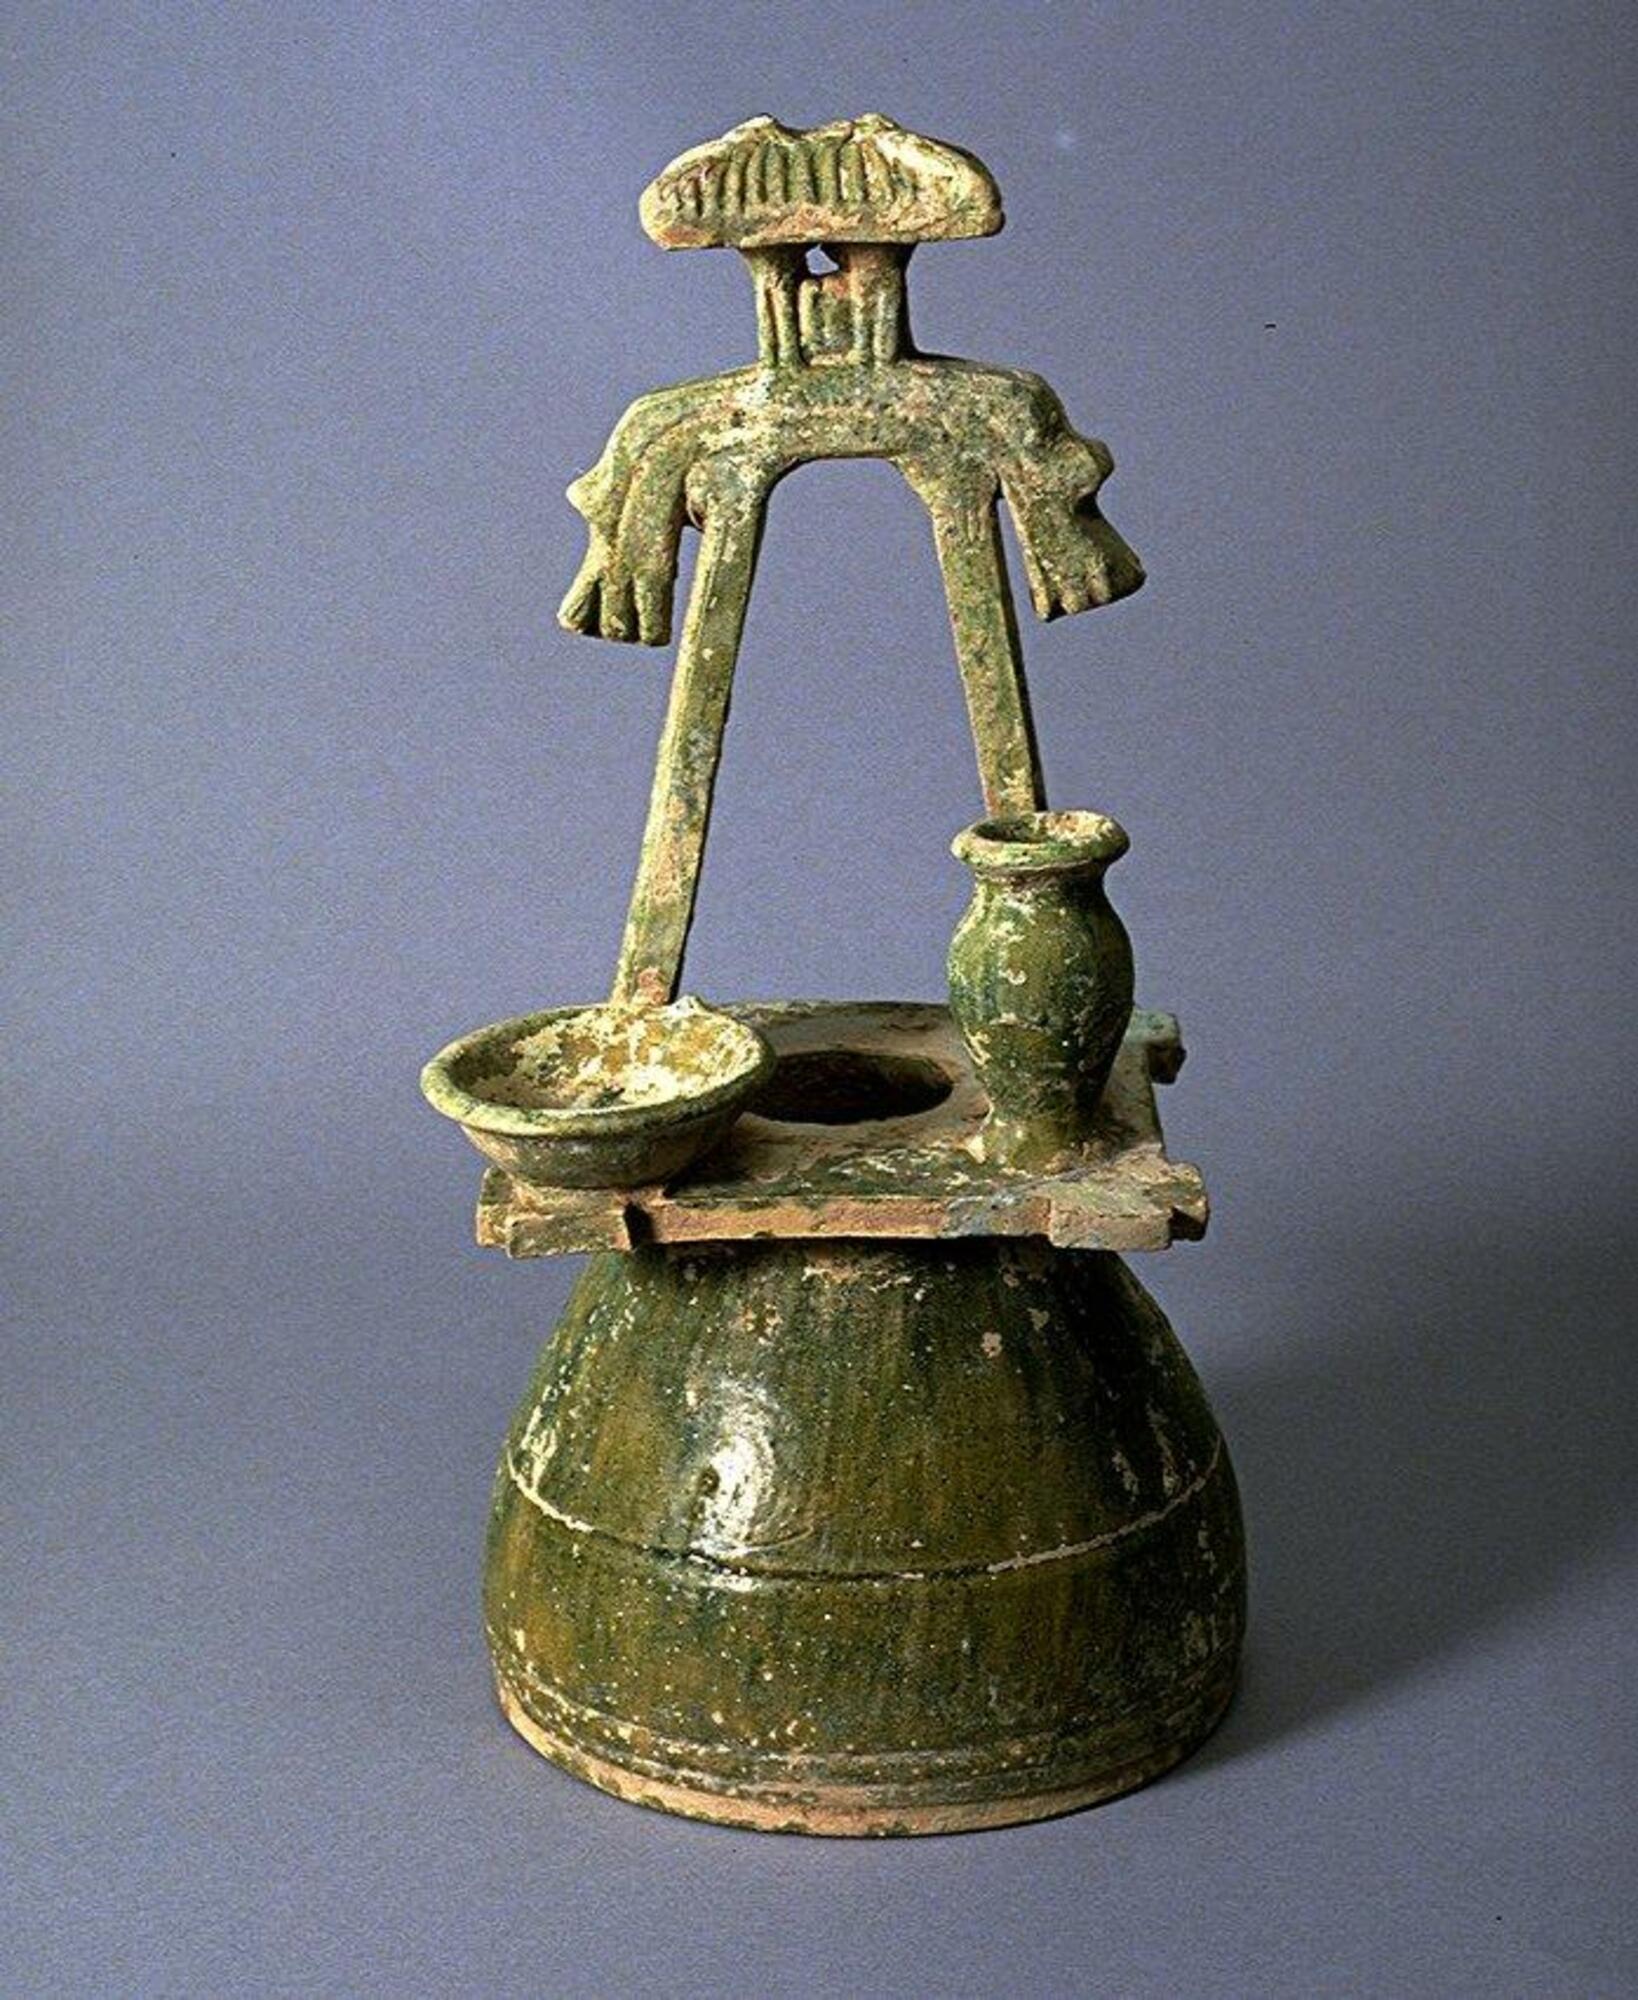 This red earthenware model of a well-head is constructed from an upside-down, wheel-thrown bowl with a hole pierced in its base to create the opening for the well. Its wide rim creates the well-head's base, and a flat clay slab forms the framed opening and windlass. It is topped with a small hip and gabled roof pavilion, and a basin and amphora rest on the framing. The model is covered in a green lead glaze, with iridescence and calcification. 